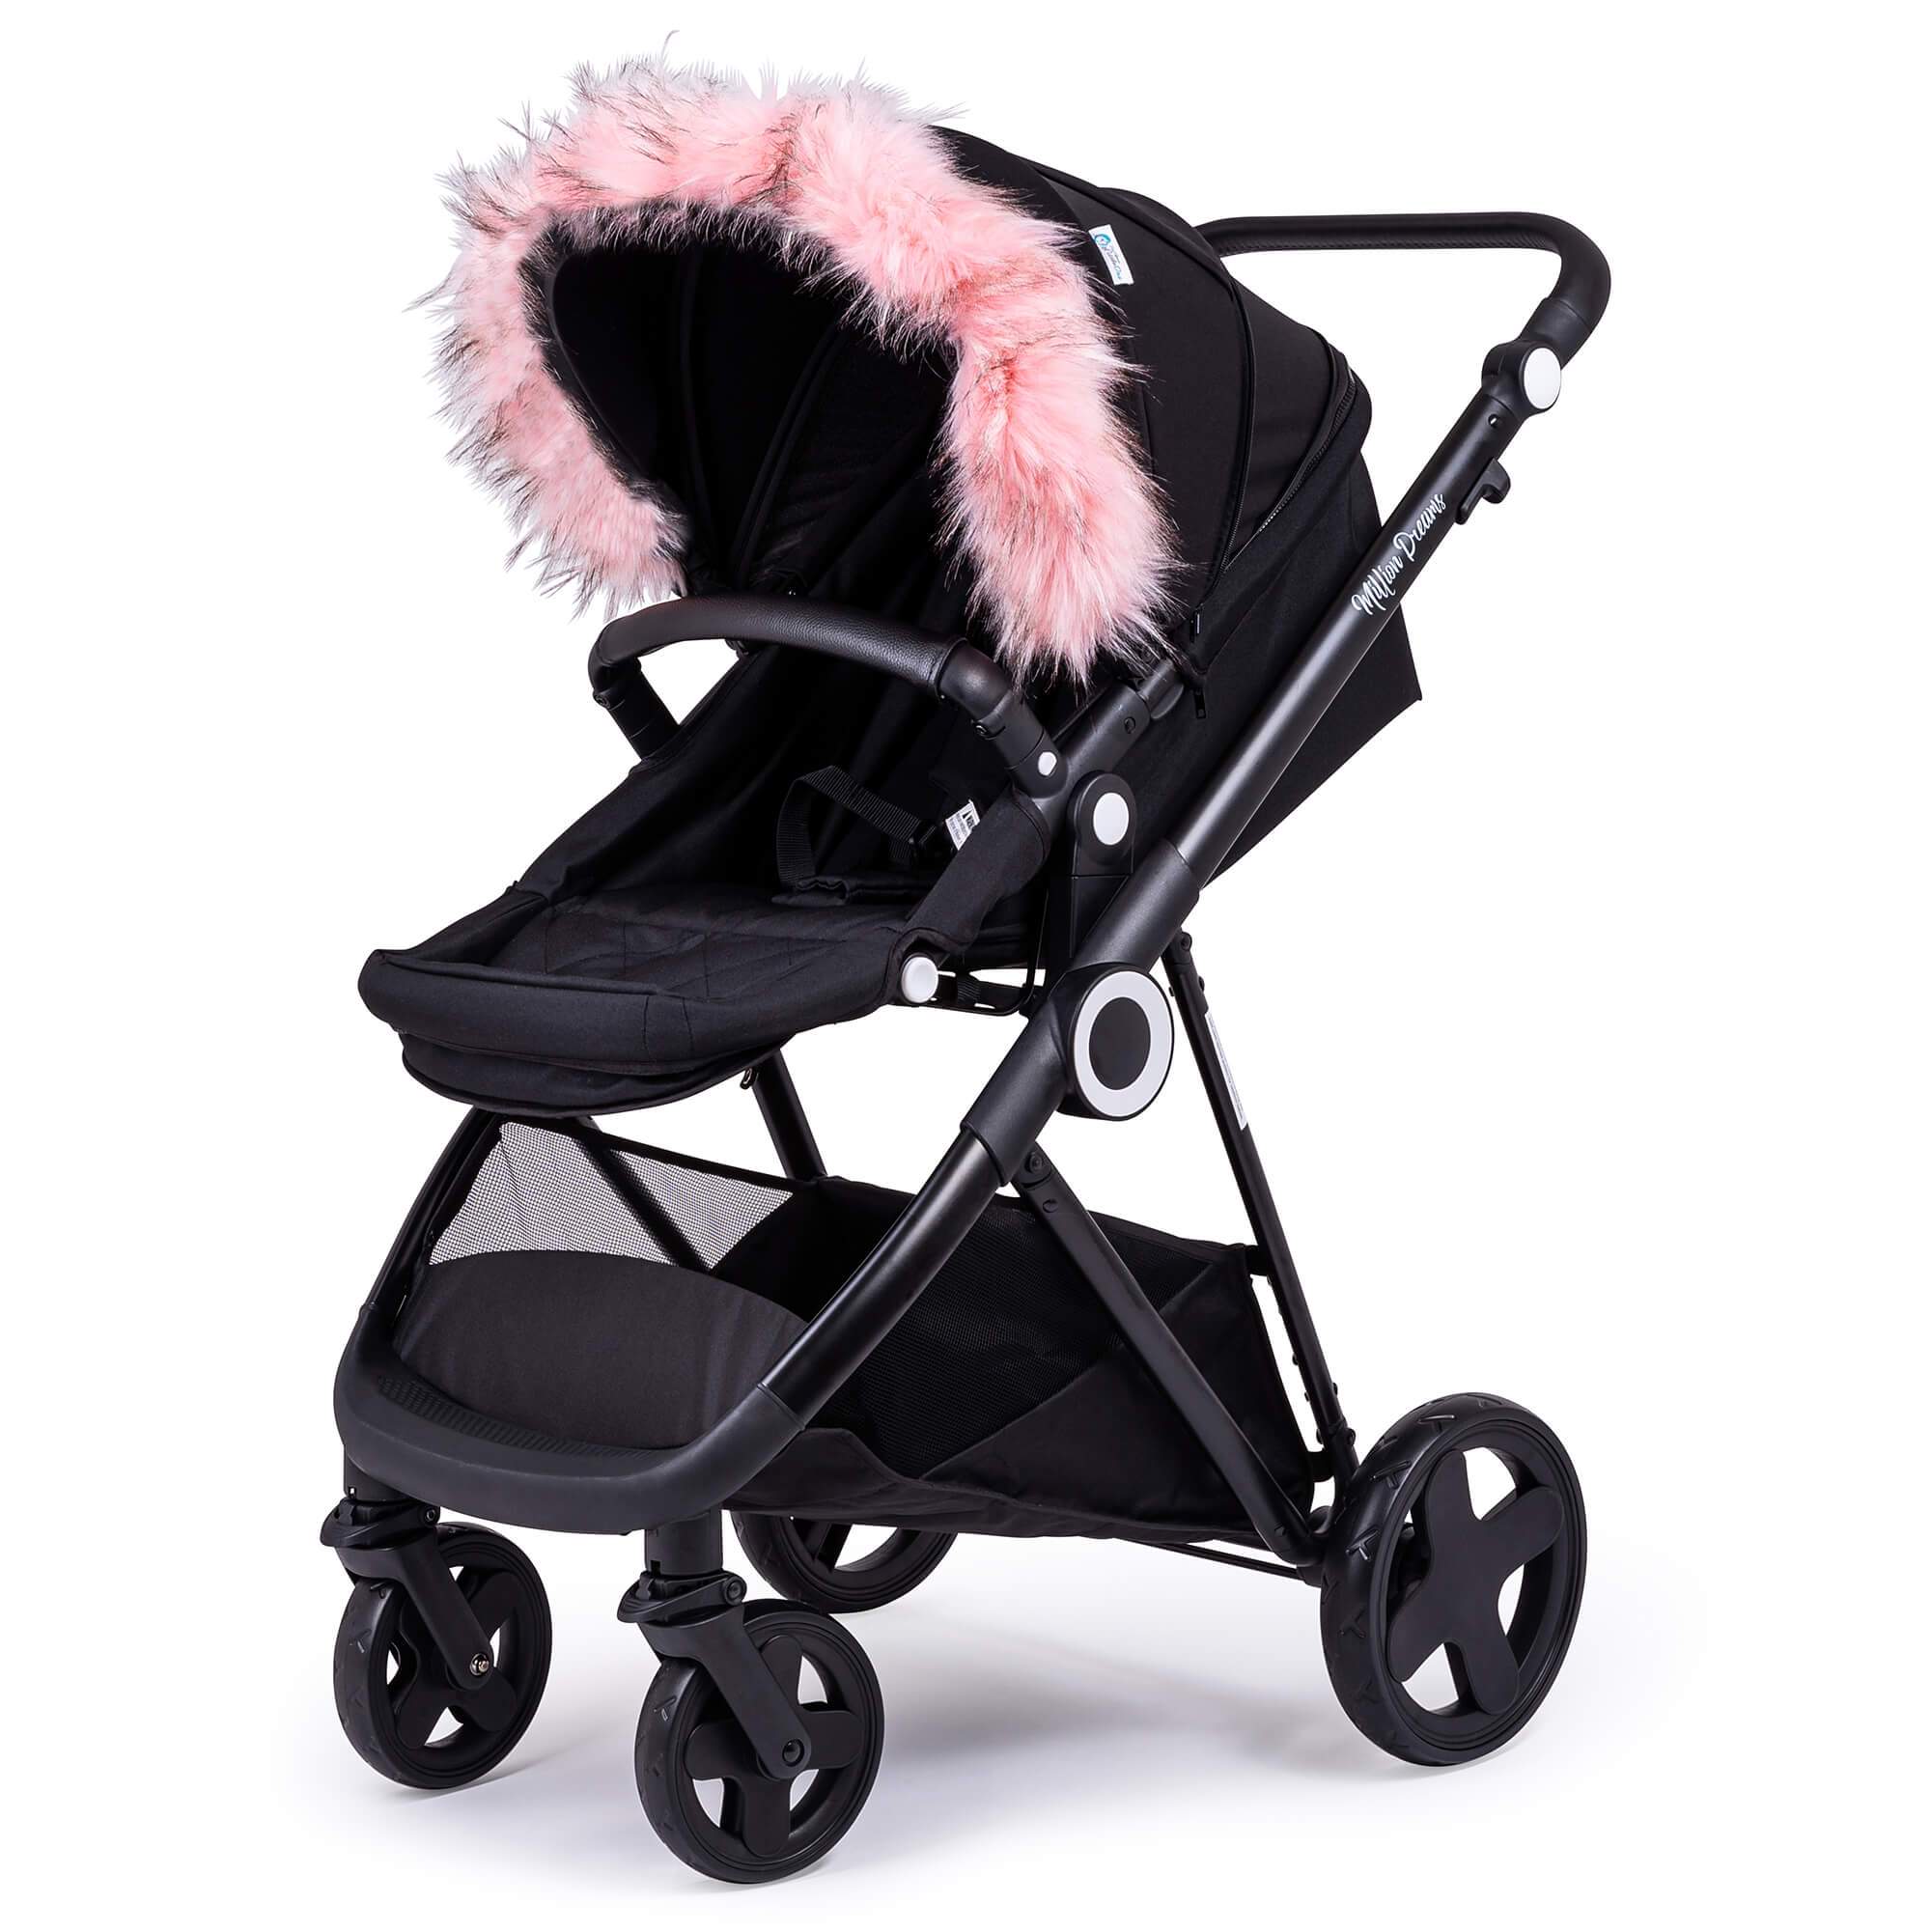 Pram Fur Hood Trim Attachment for Pushchair Compatible with Baby Weavers - Light Pink / Fits All Models | For Your Little One